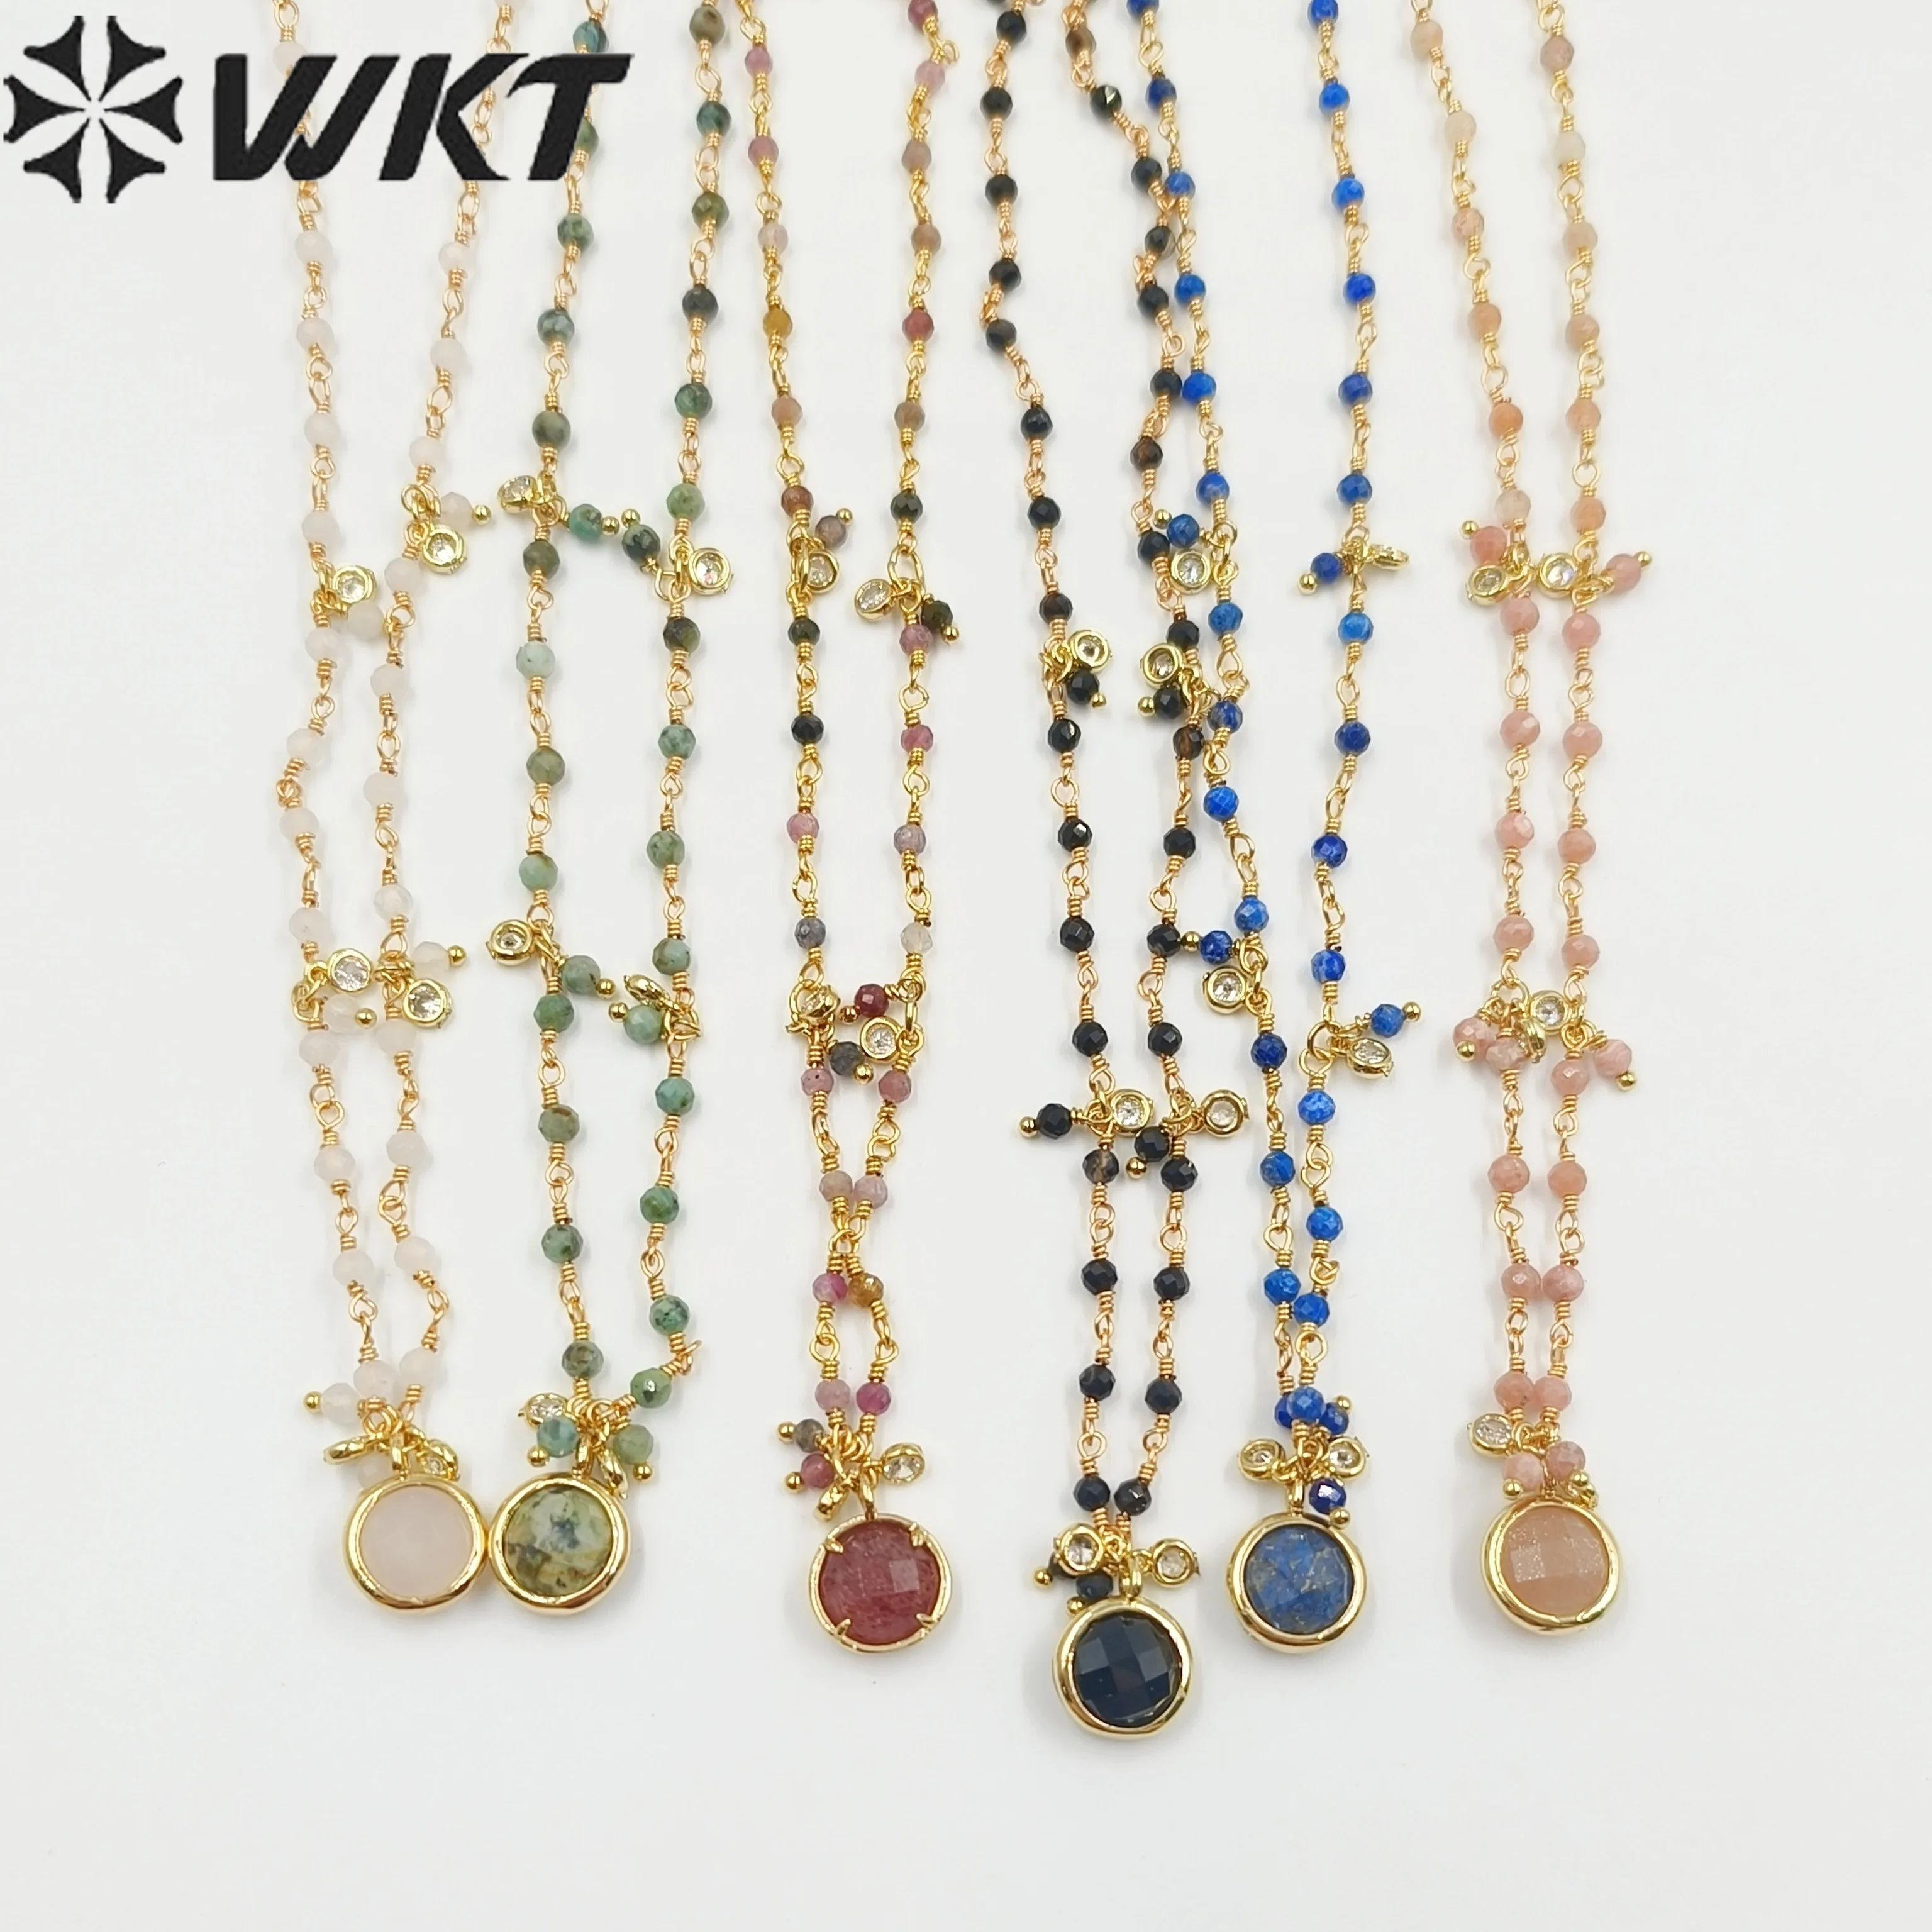 

WT-N1431 Fresh and Sweet Style Rosary Gemstone Beads Charm Necklaces are a Must-have for Girls commuter or dating